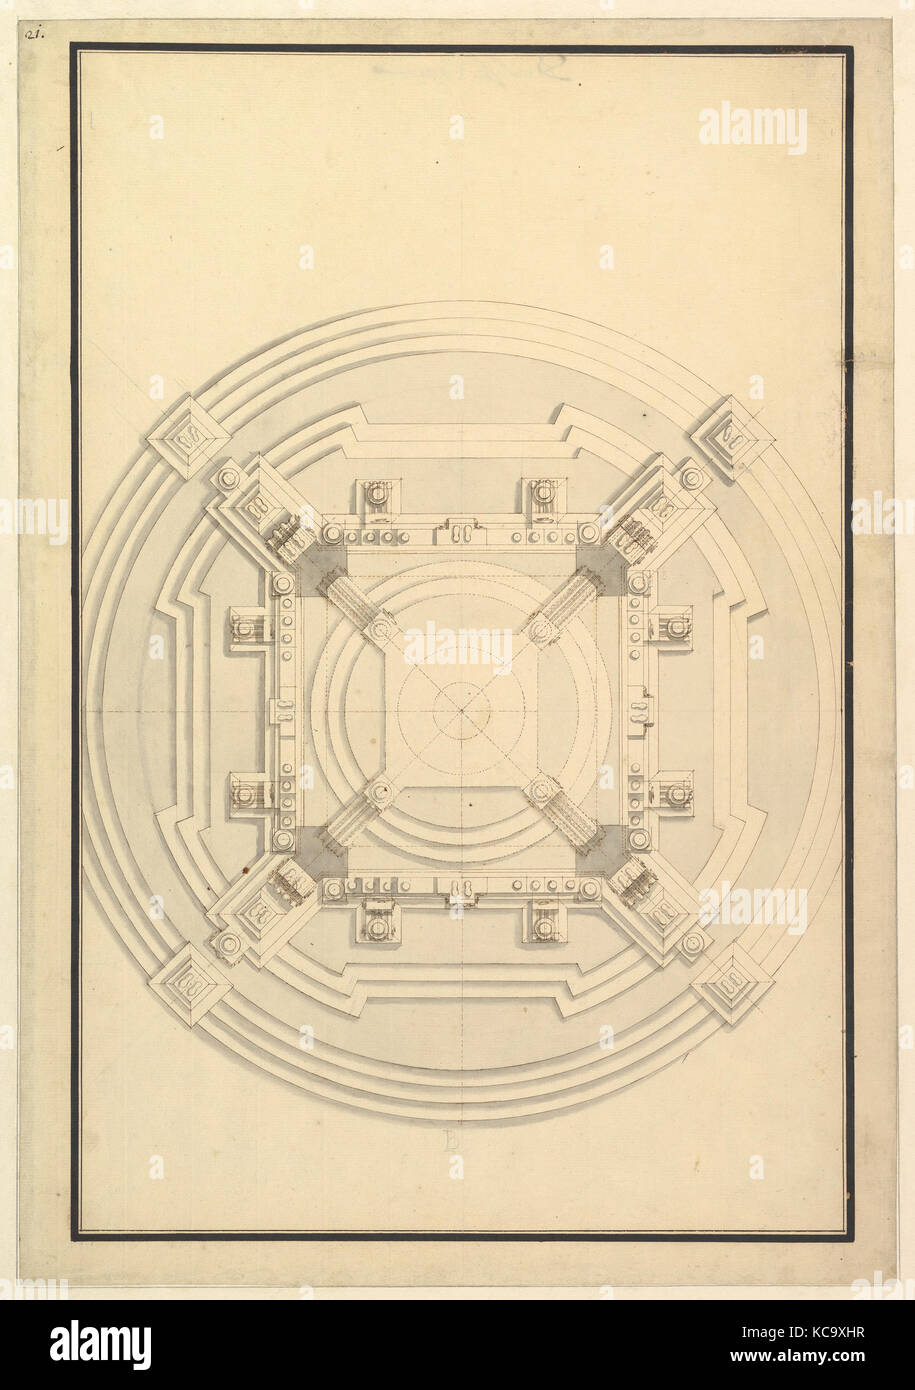 Ground Plan for a Catafalque for a Duchess of Hanover, probably Sophia (1630-1714) the mother of George I of England Stock Photo